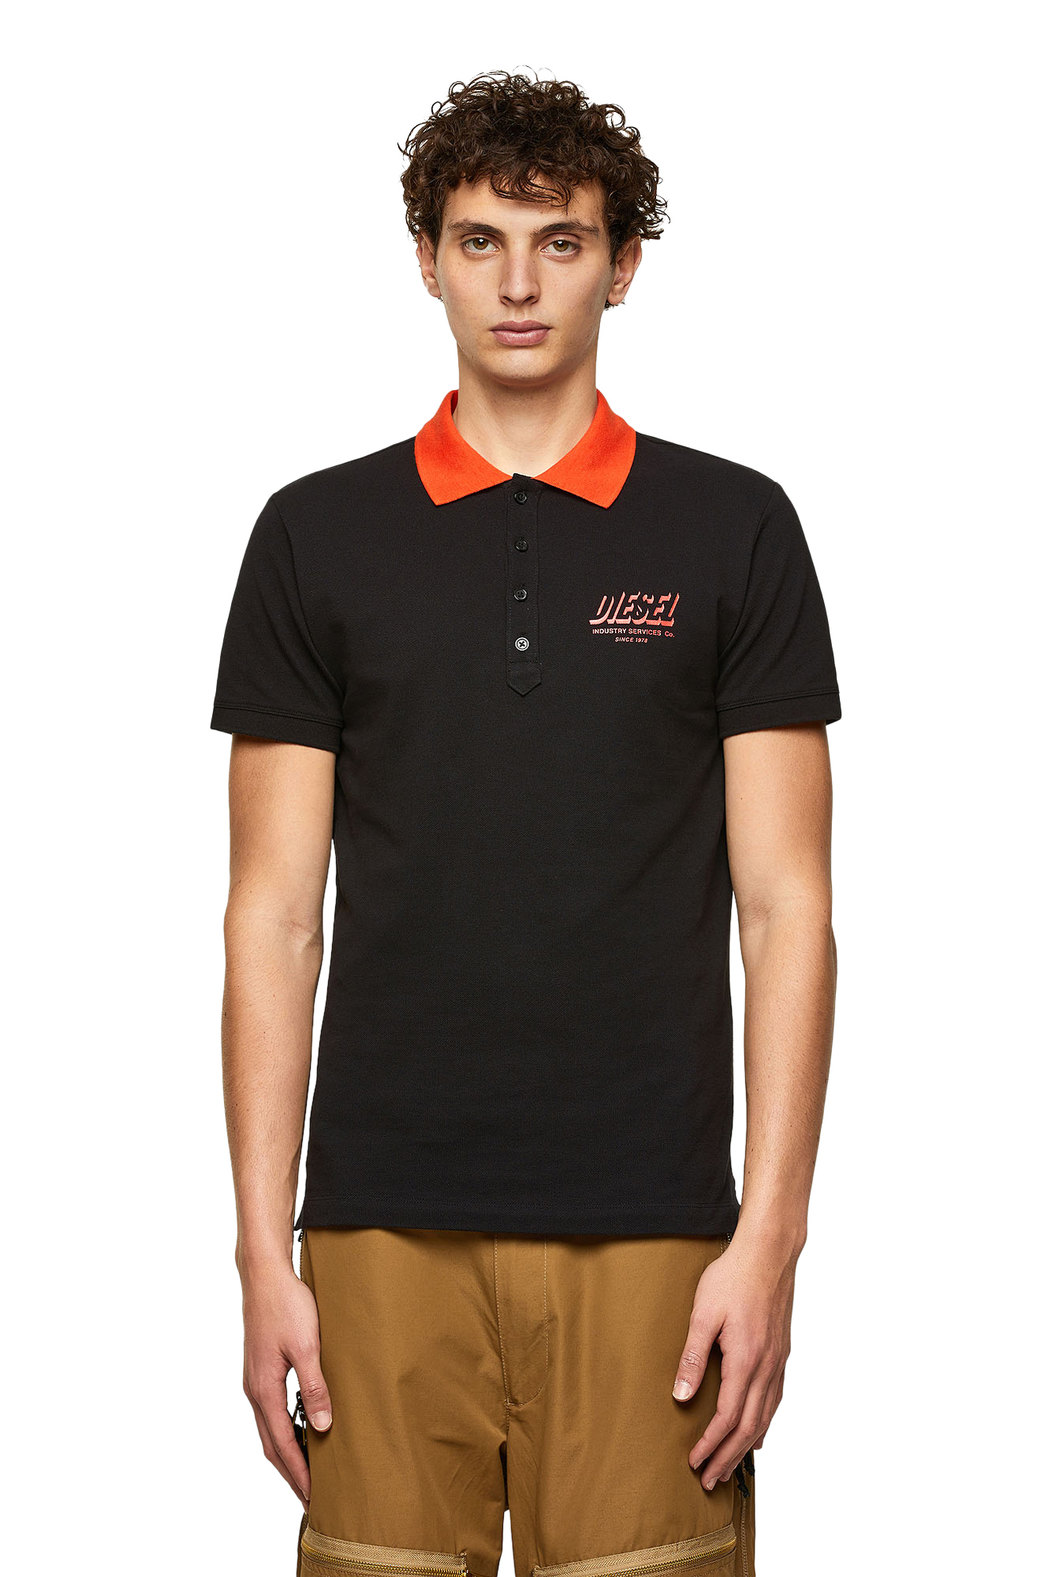 Polo shirt with Diesel Industry prints